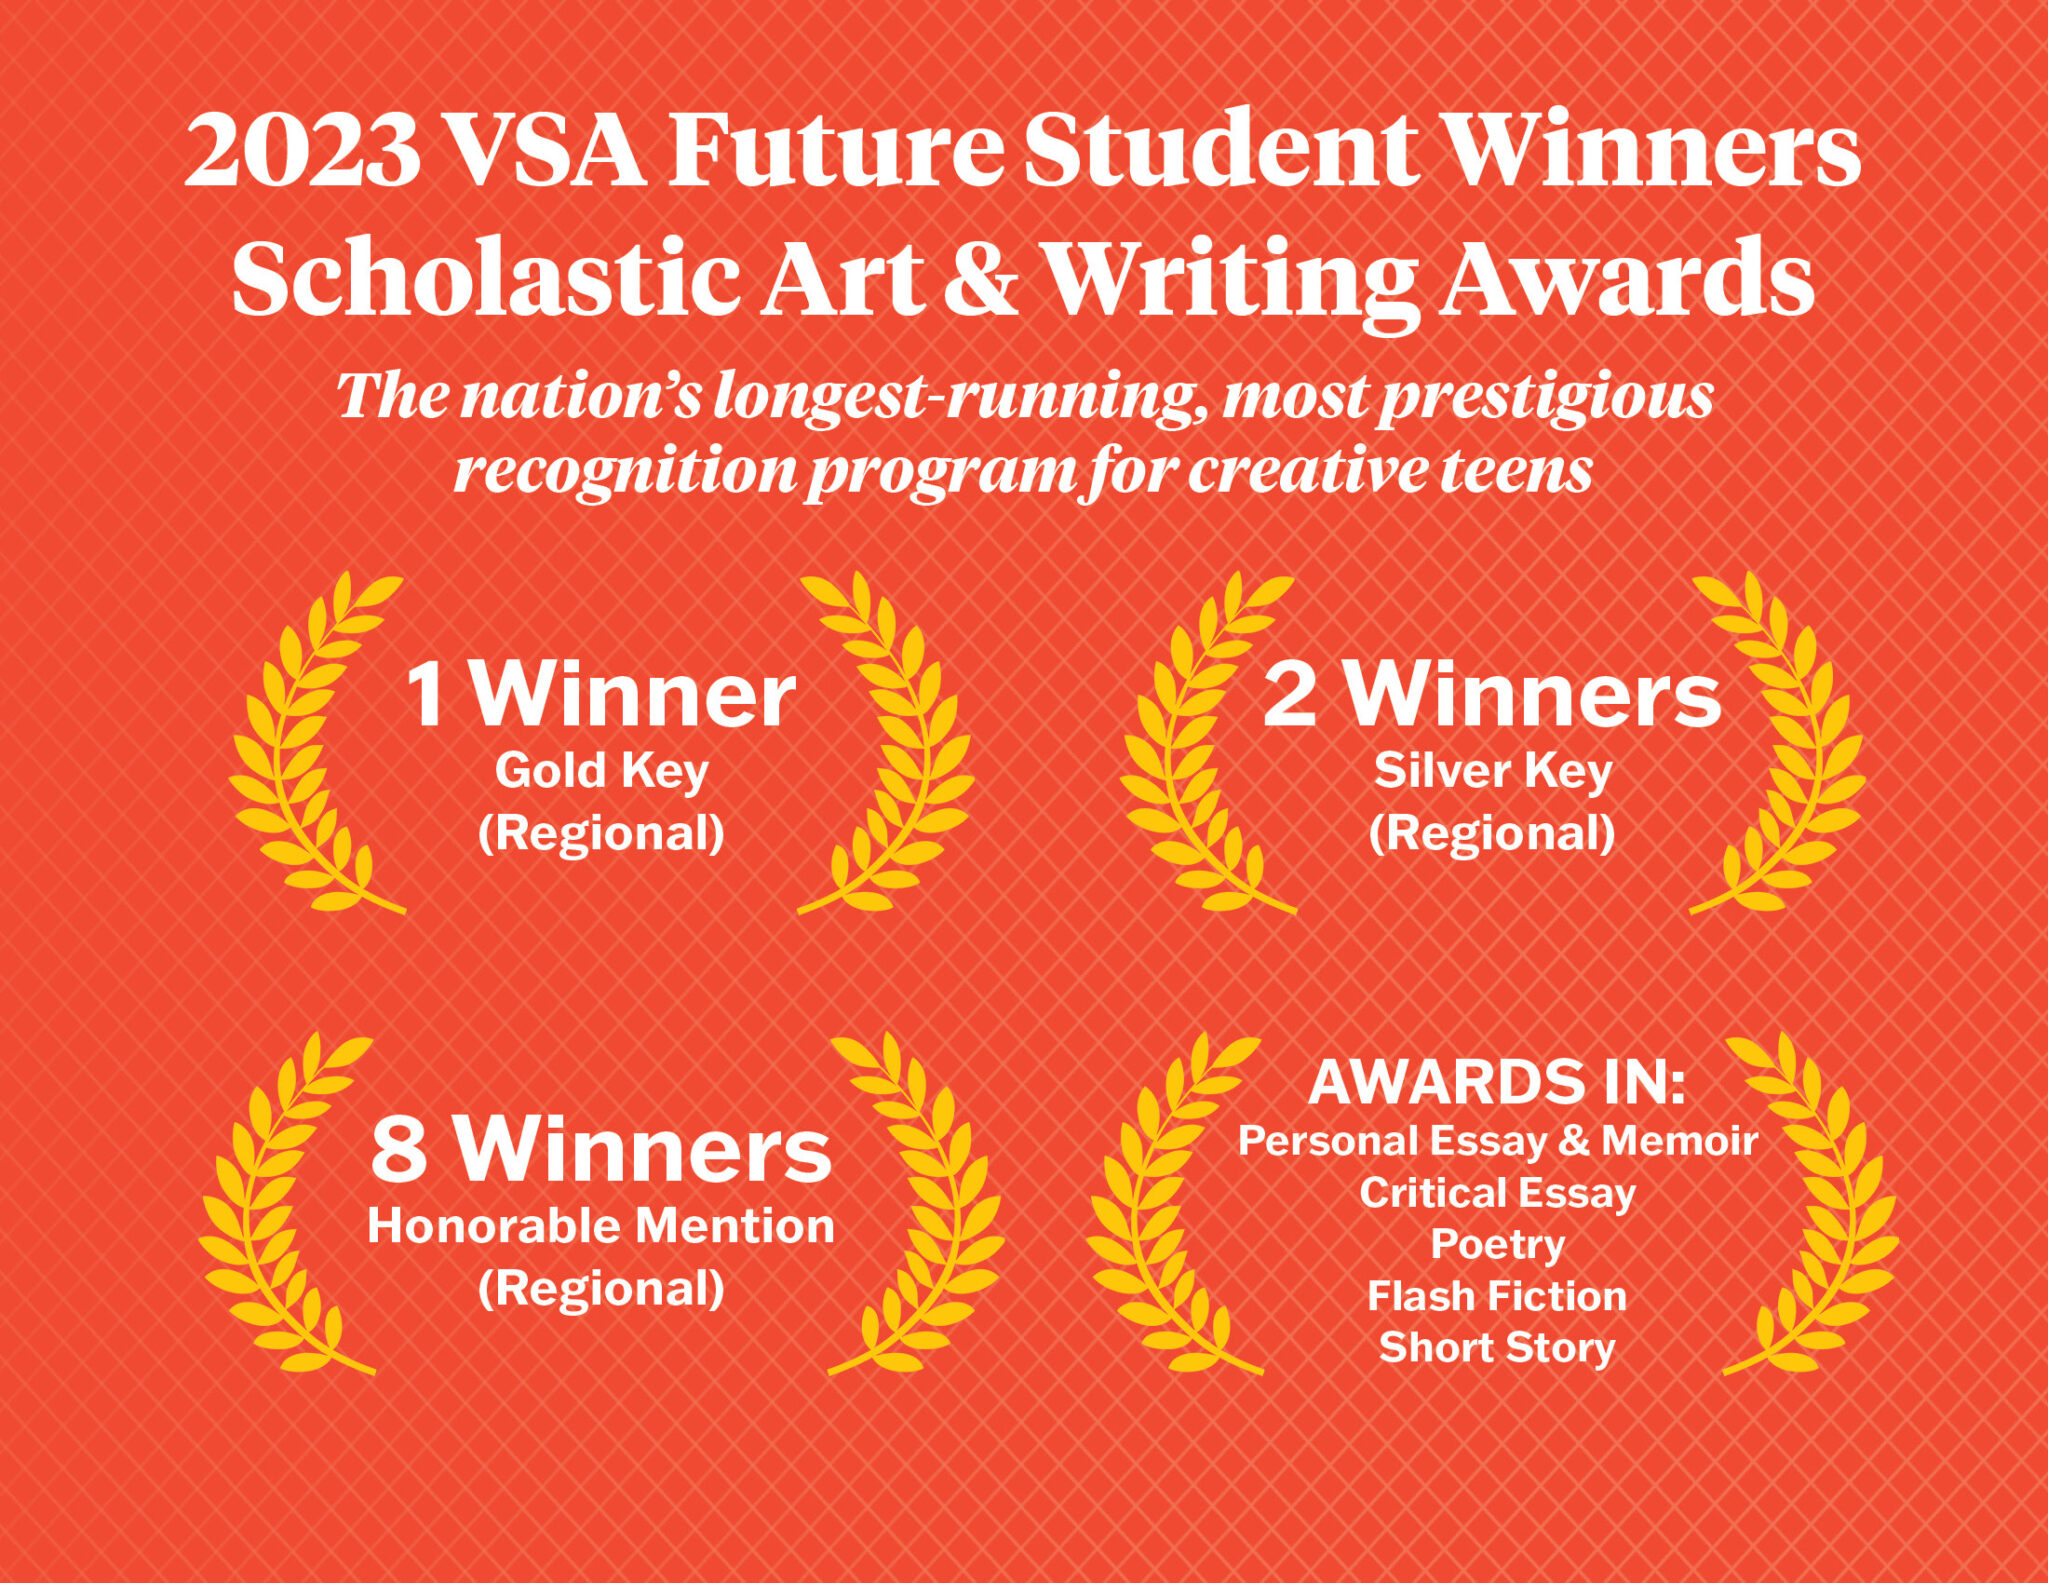 VSA Students Earn 11 Medals in Scholastic Awards Community Info Share